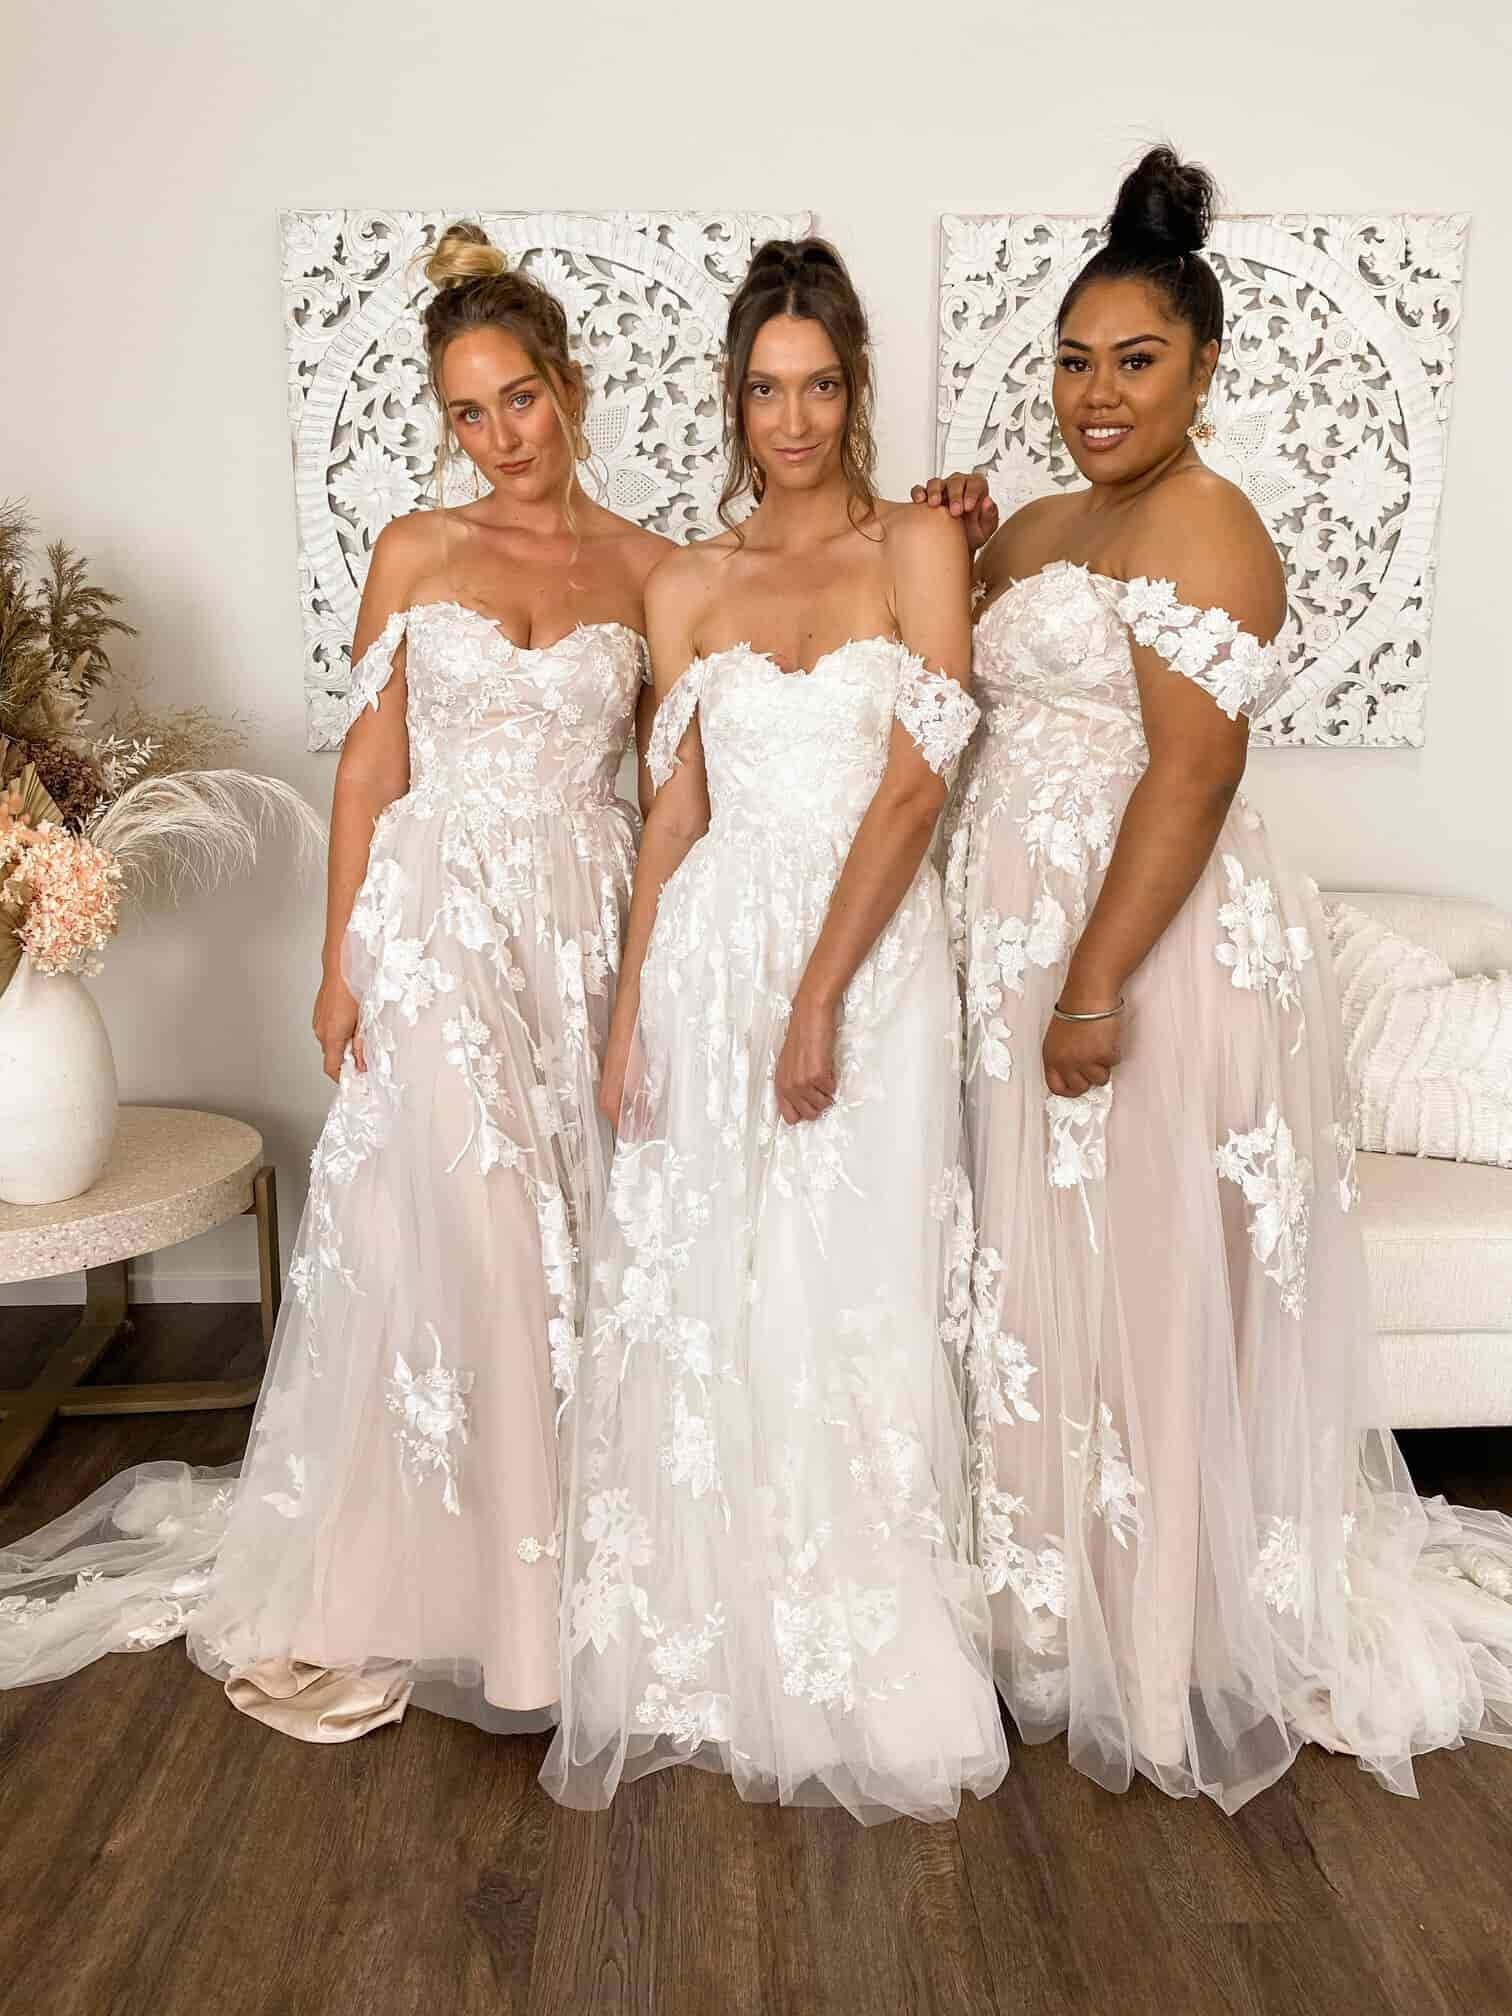 Photos of 3 real brides full height